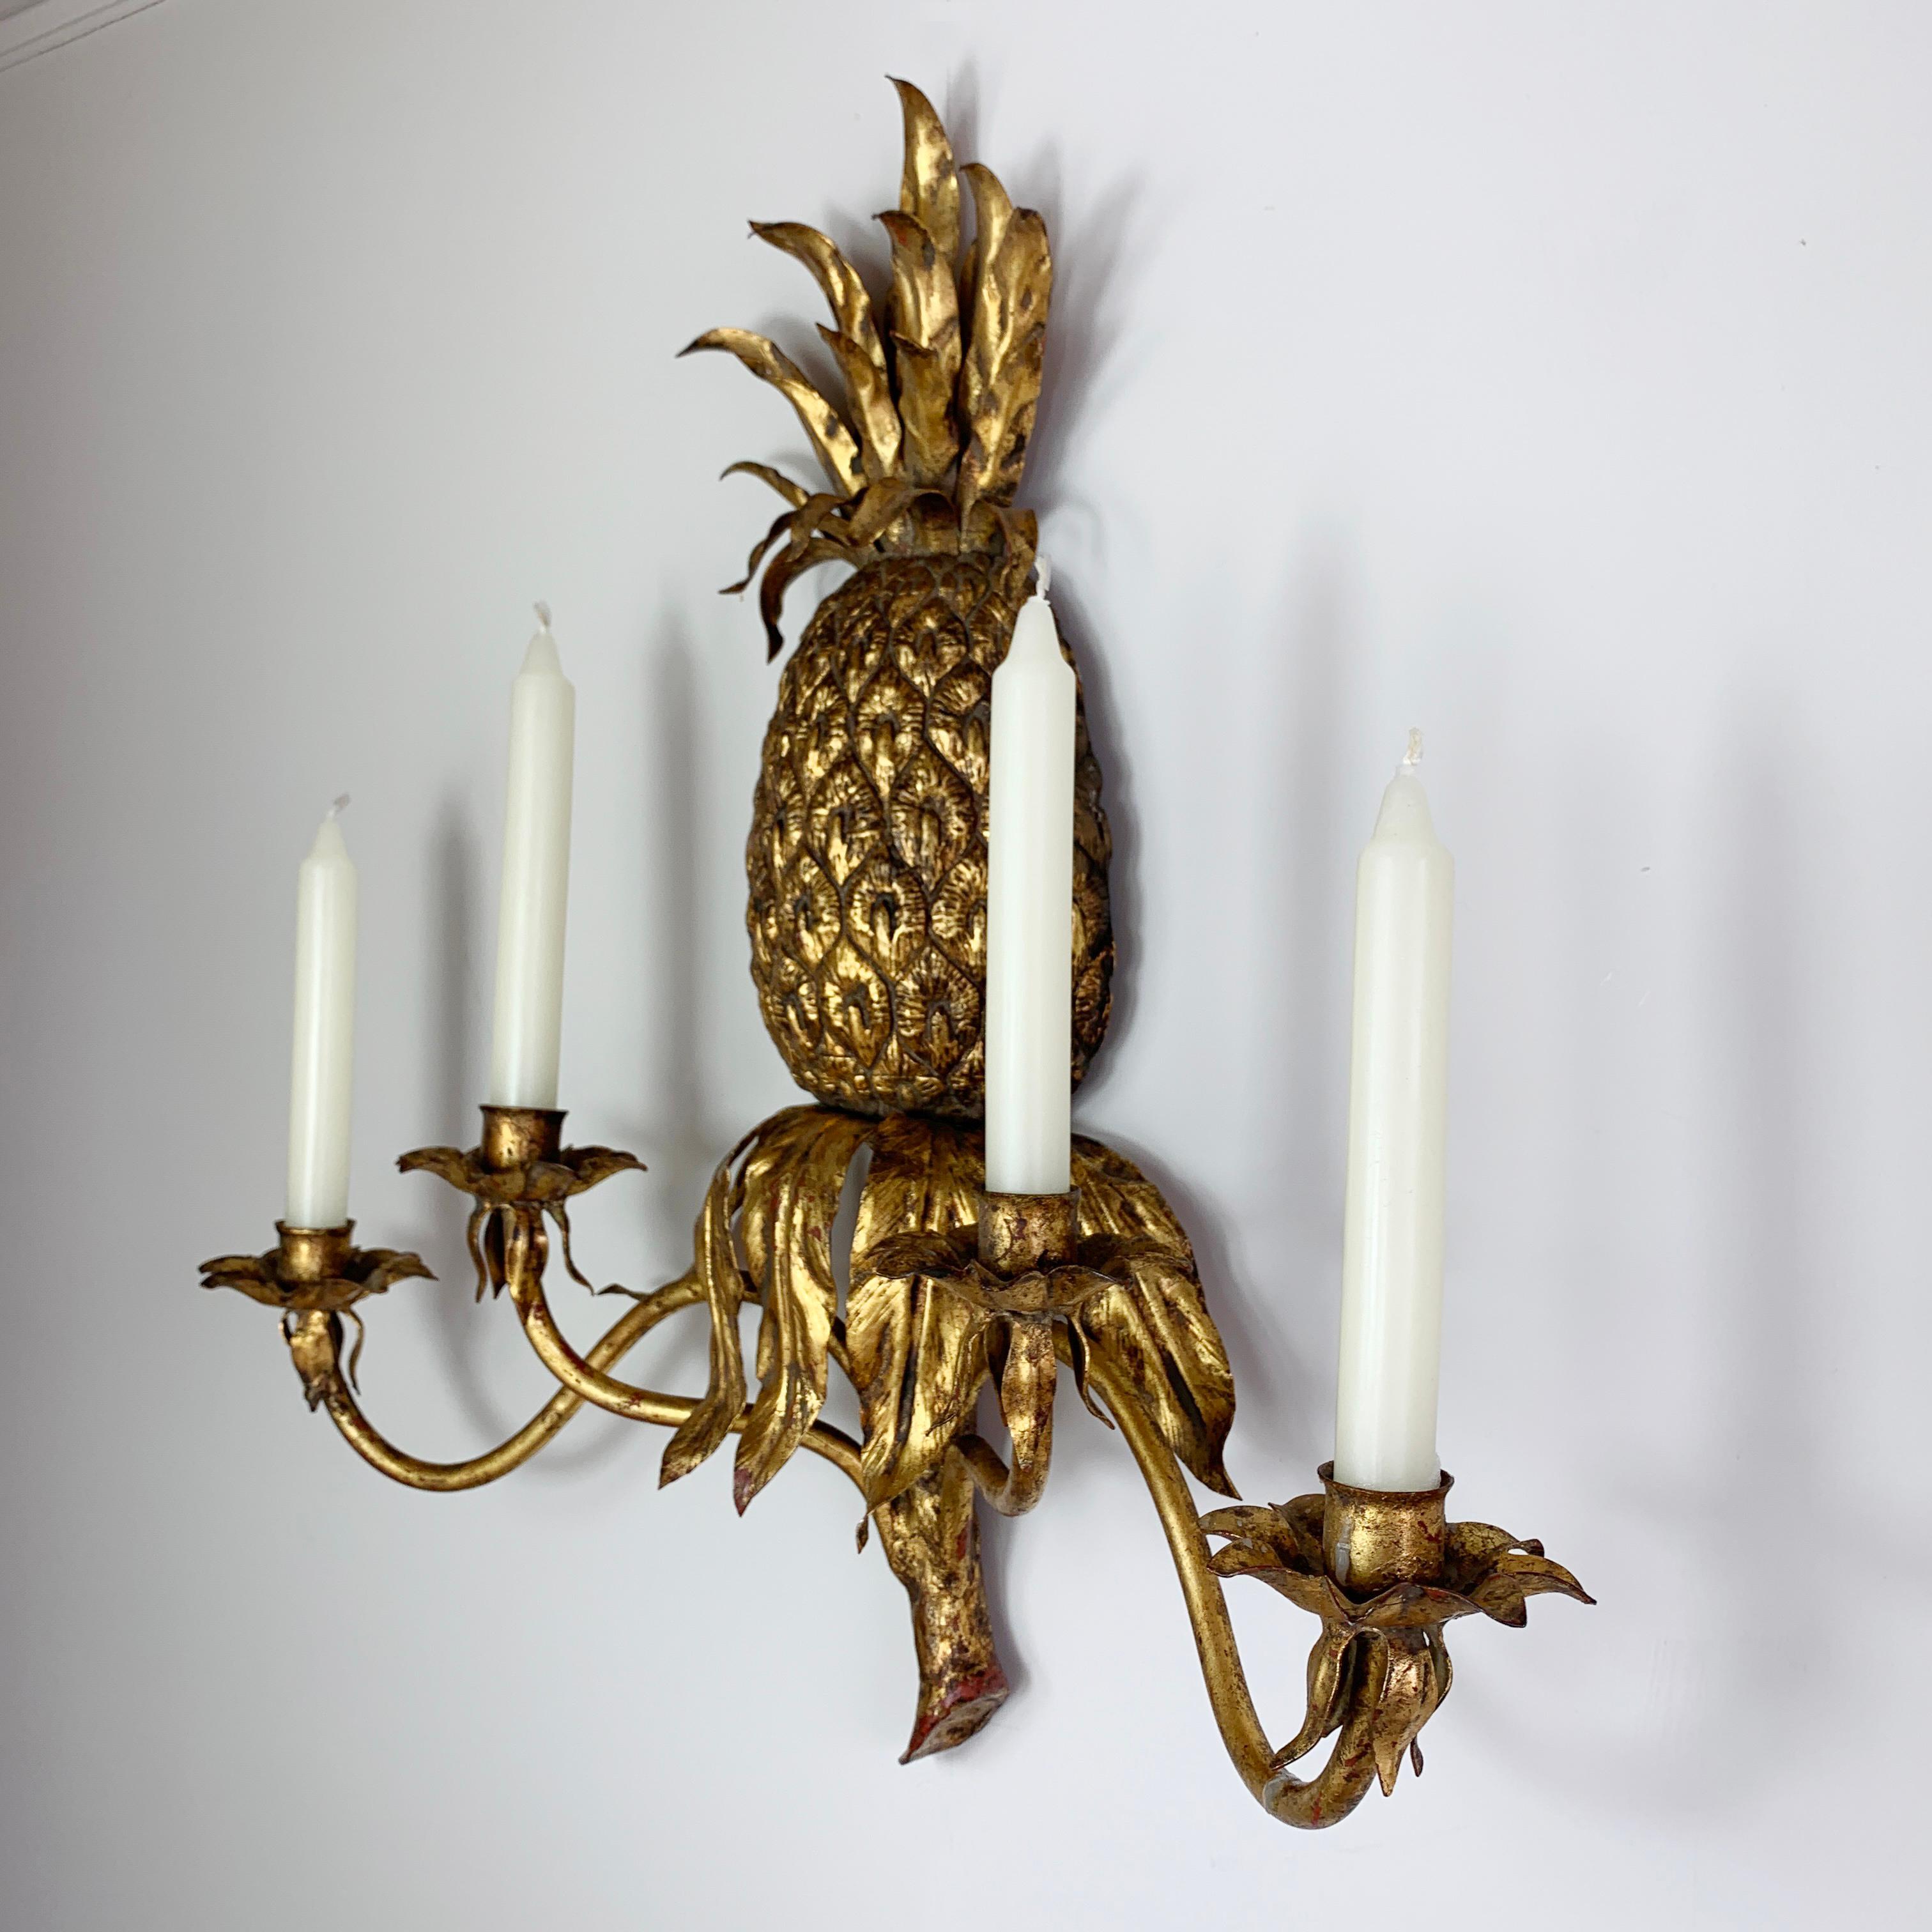 Baroque Italian Pineapple Candle Wall Sconce 1950’s Gold Wrought Iron  For Sale